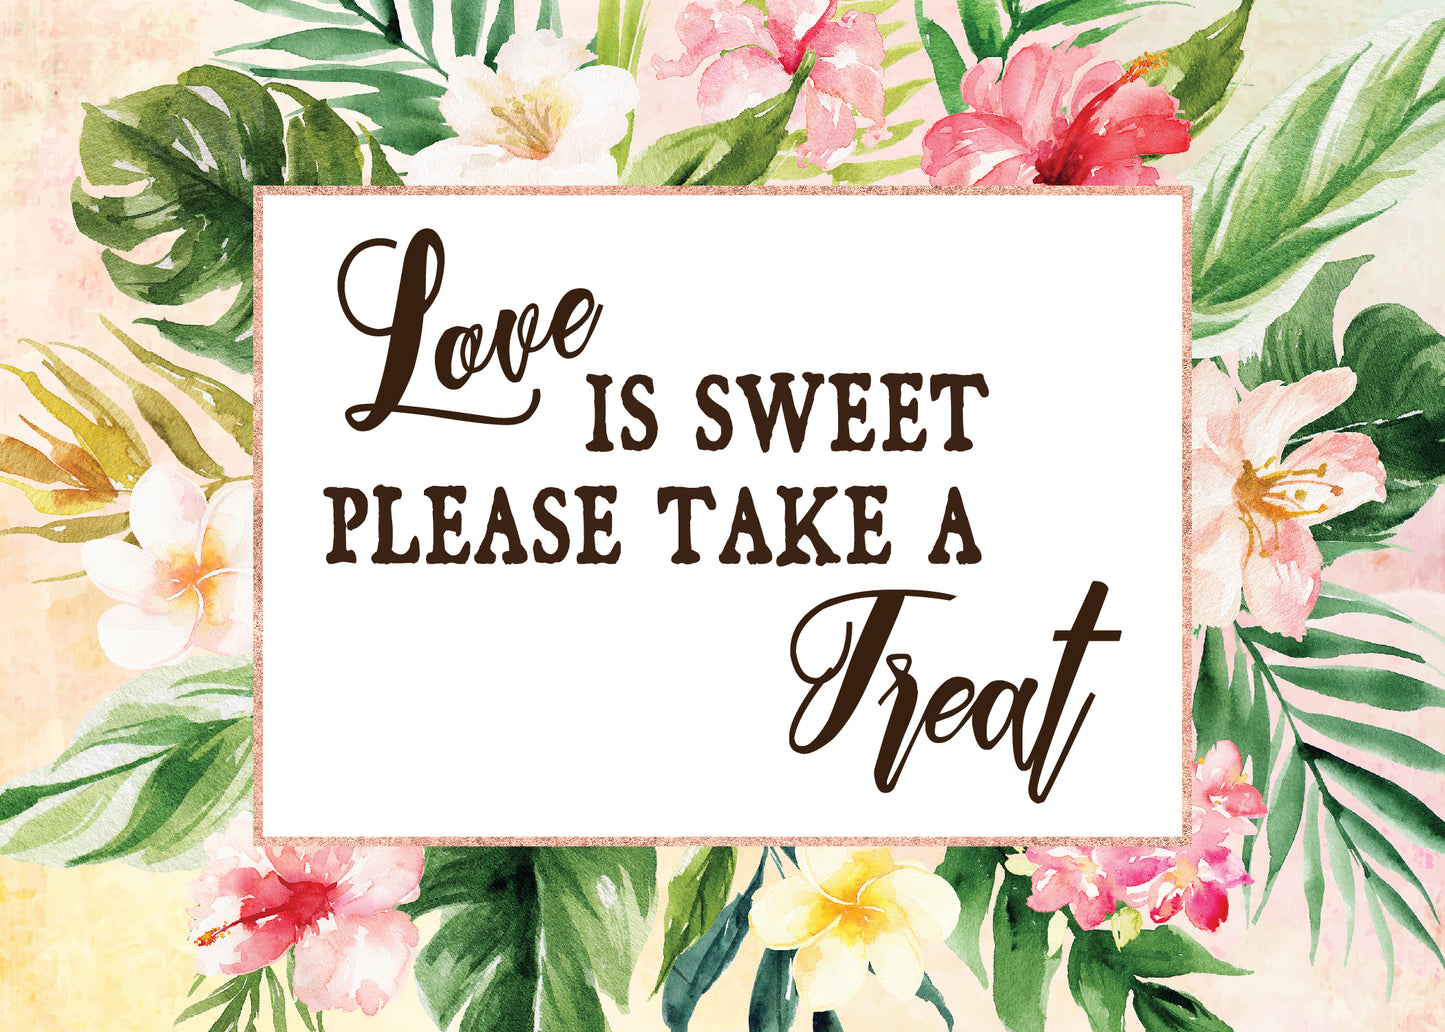 Tropical Floral Watercolor Beach Destination "Love is Sweet Please Take a Treat" 5x7 Sign Digital "Instant Download" - 'TROPICAL LUSH"